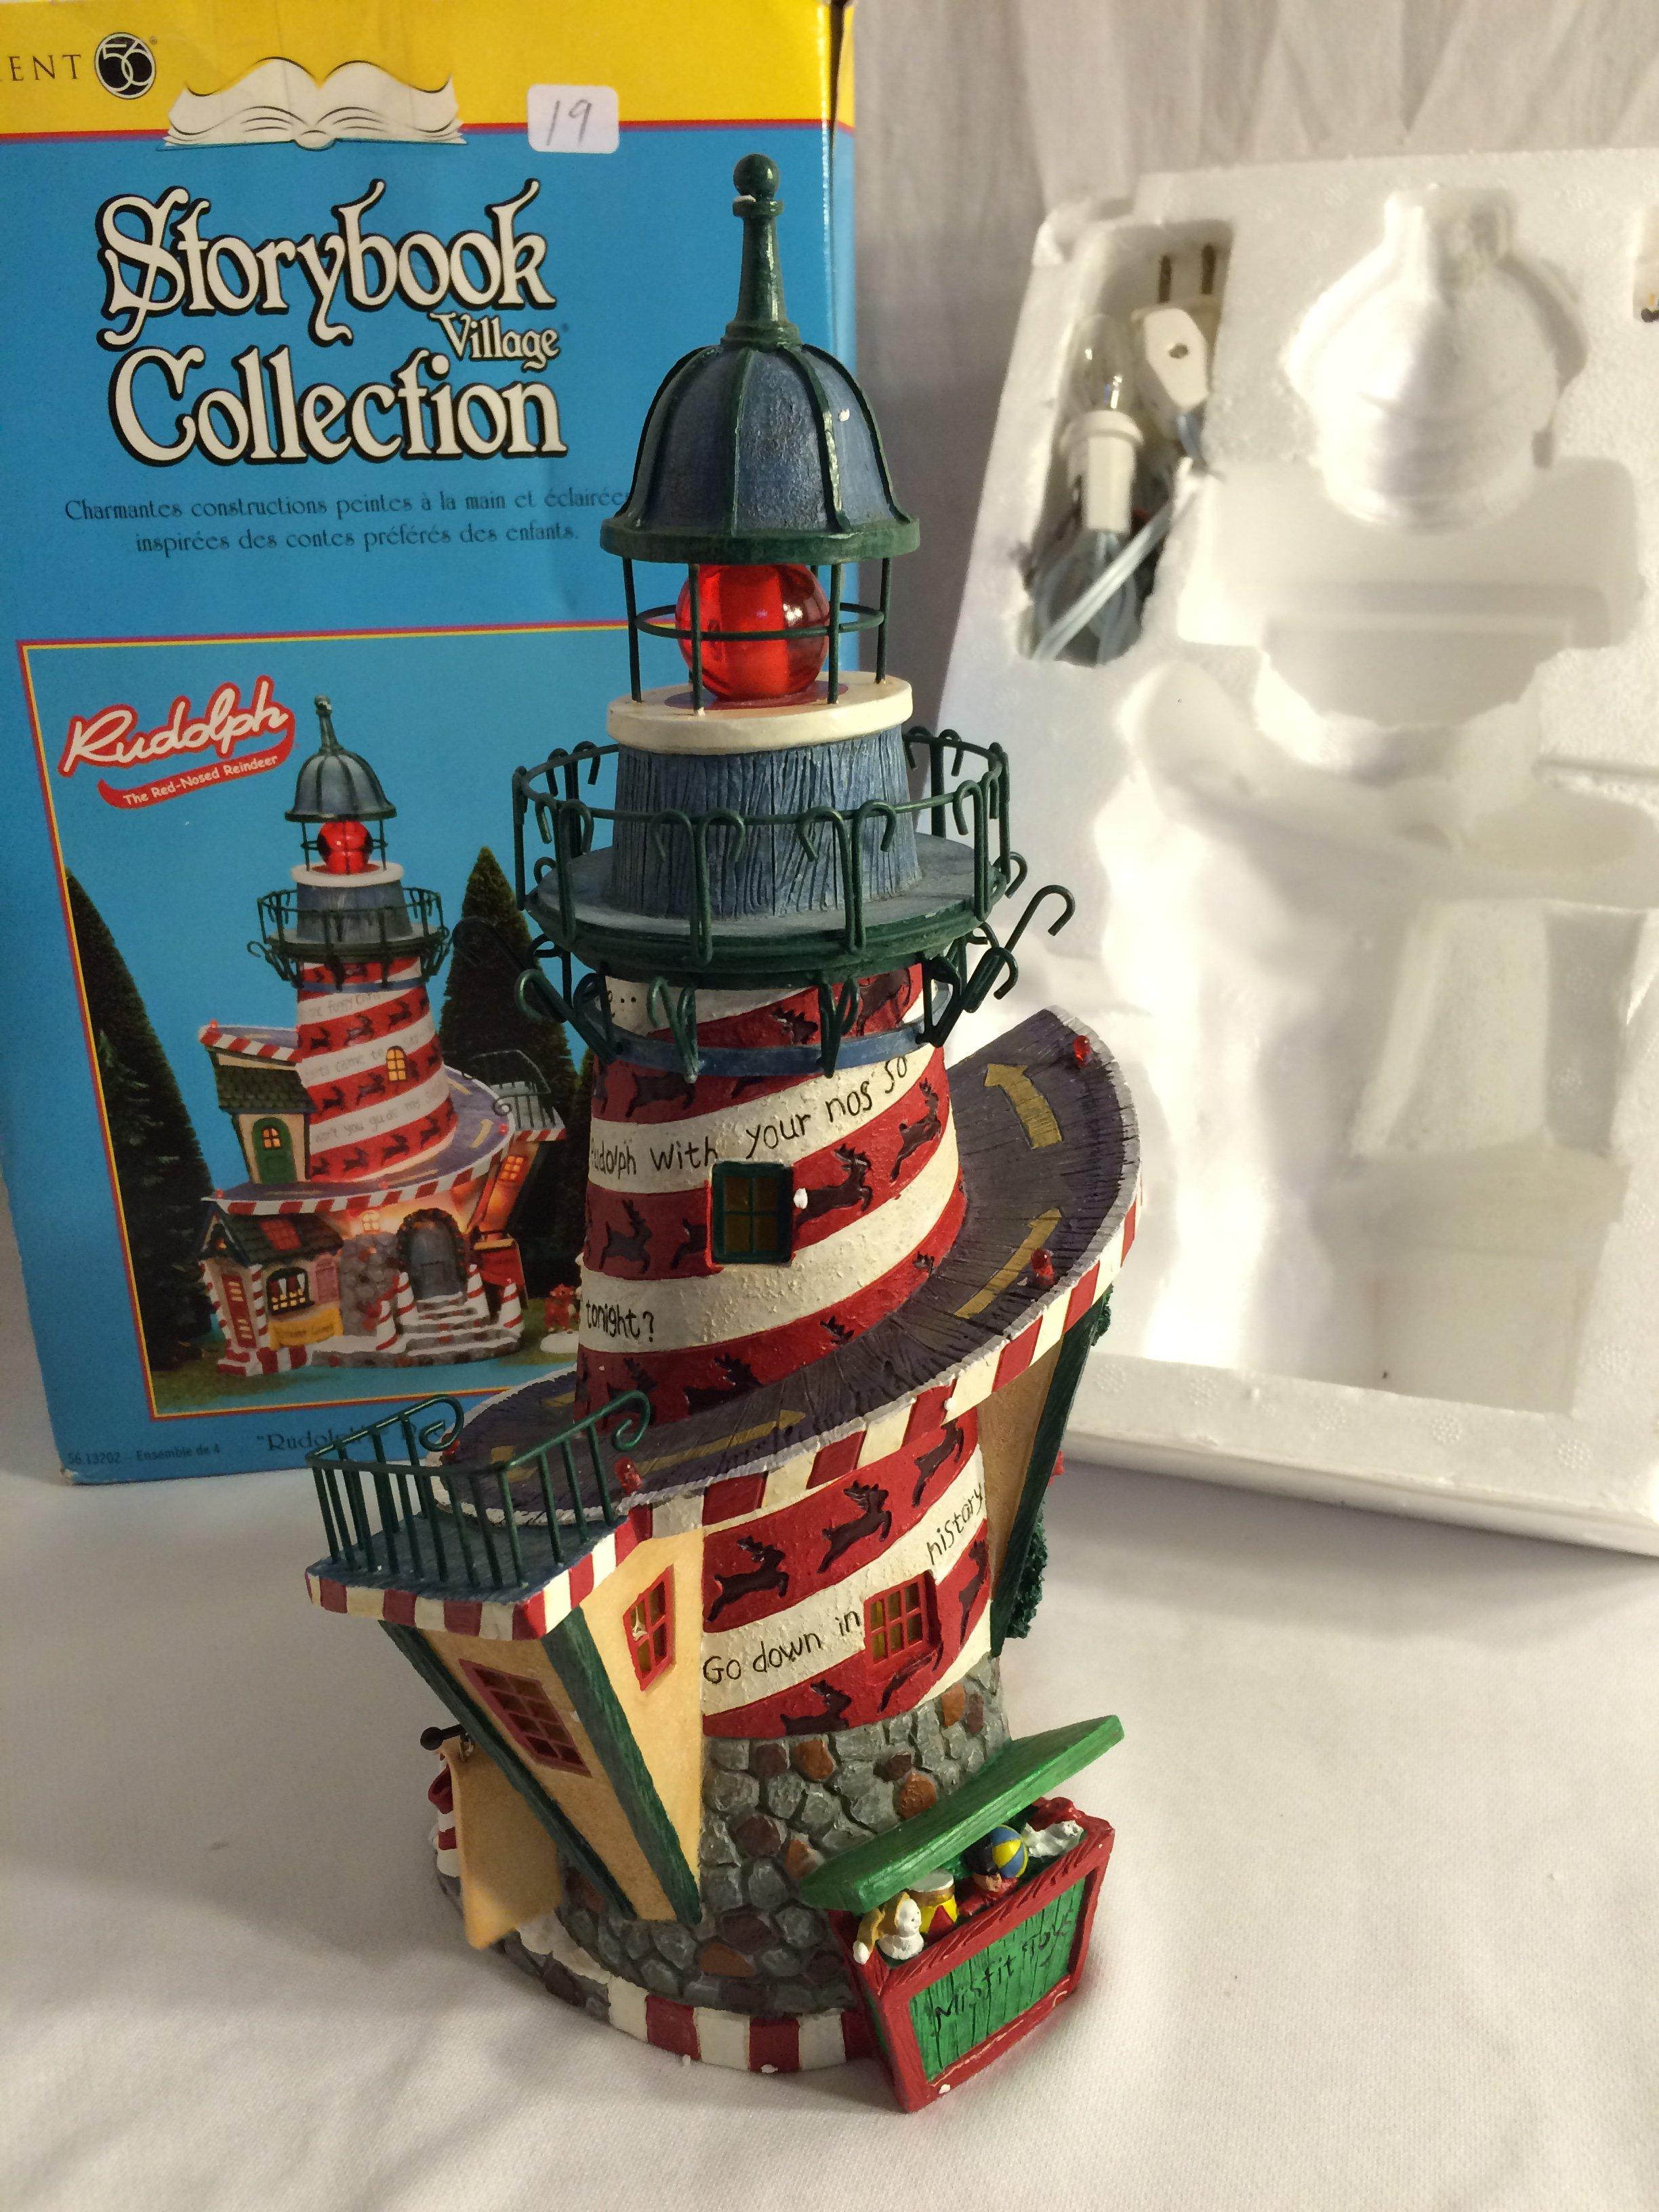 Storybook Village Collection "Rudolph's Red-Nosed Lighthouse 56.13202 Handpainted Lighted Building